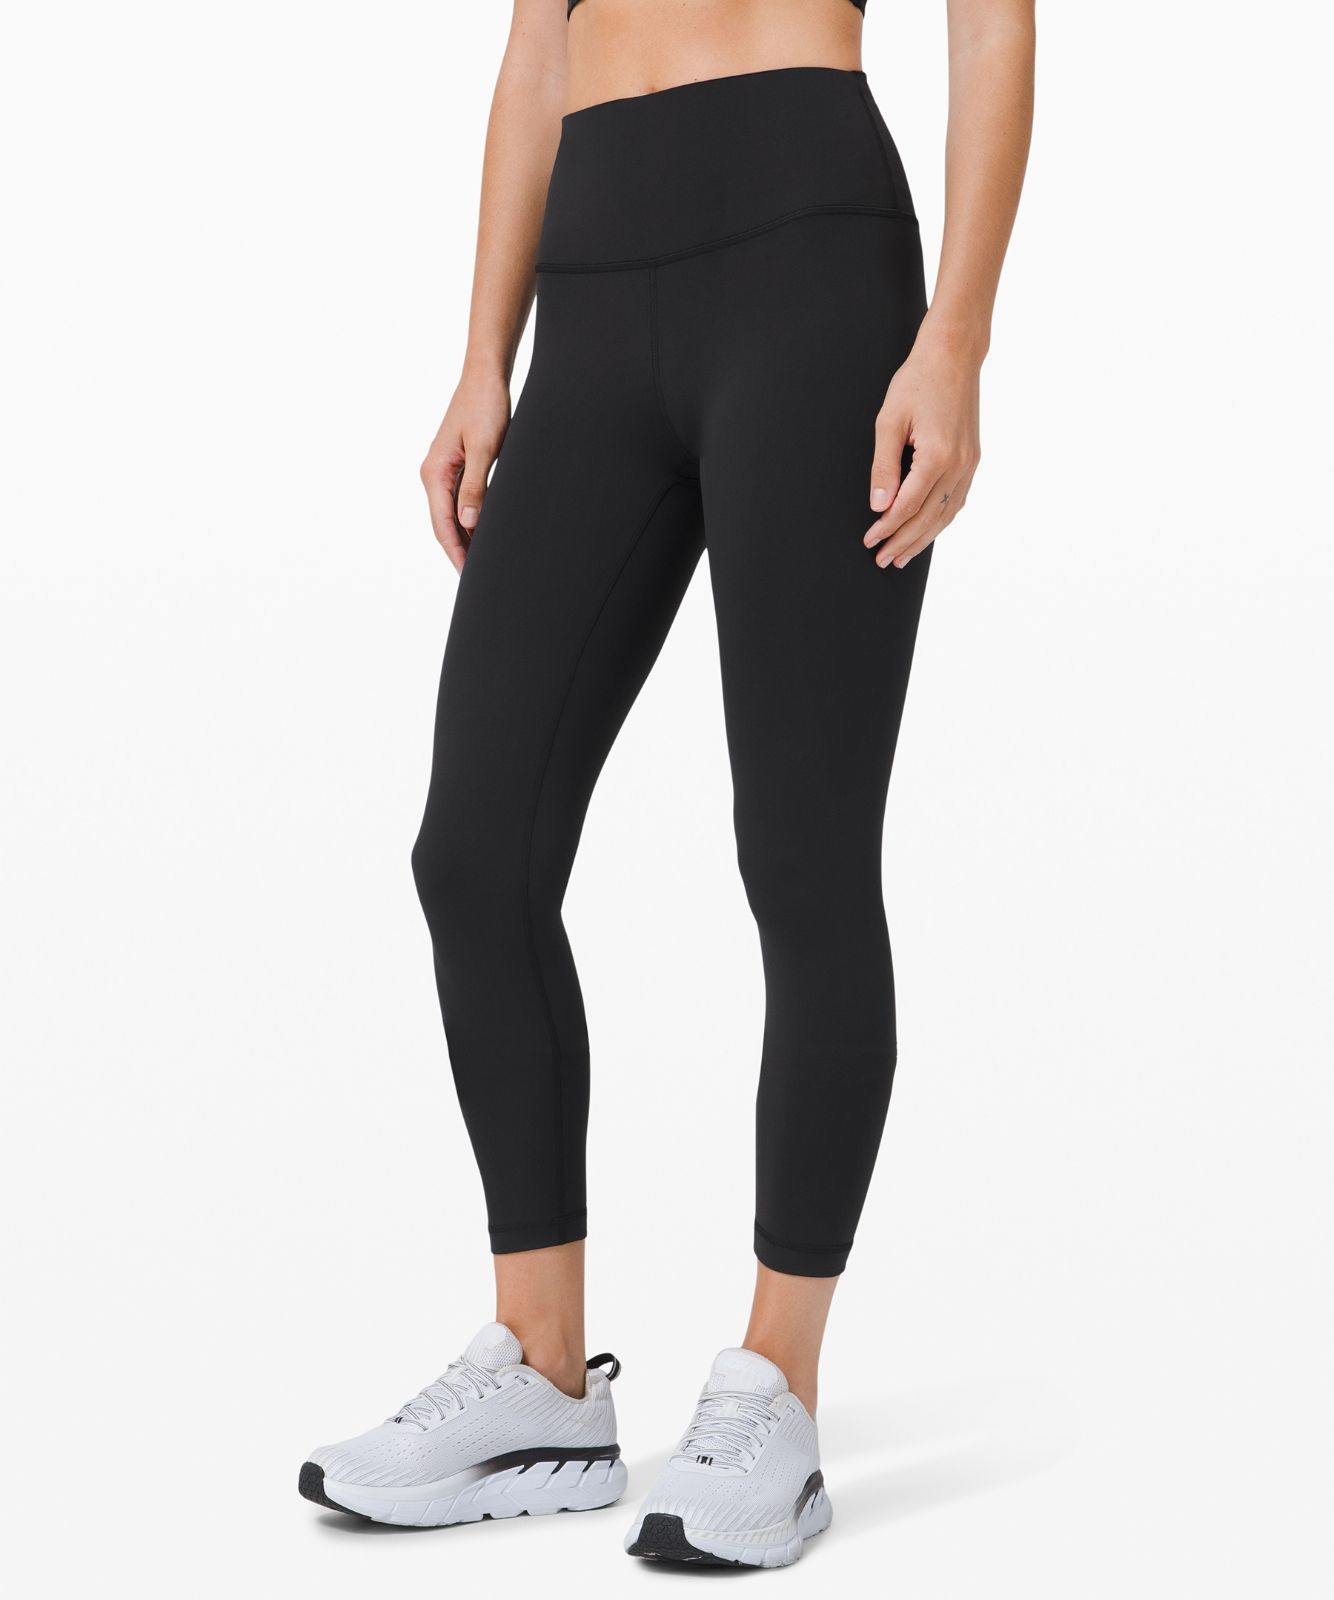 16 Petite Workout Leggings for Every 